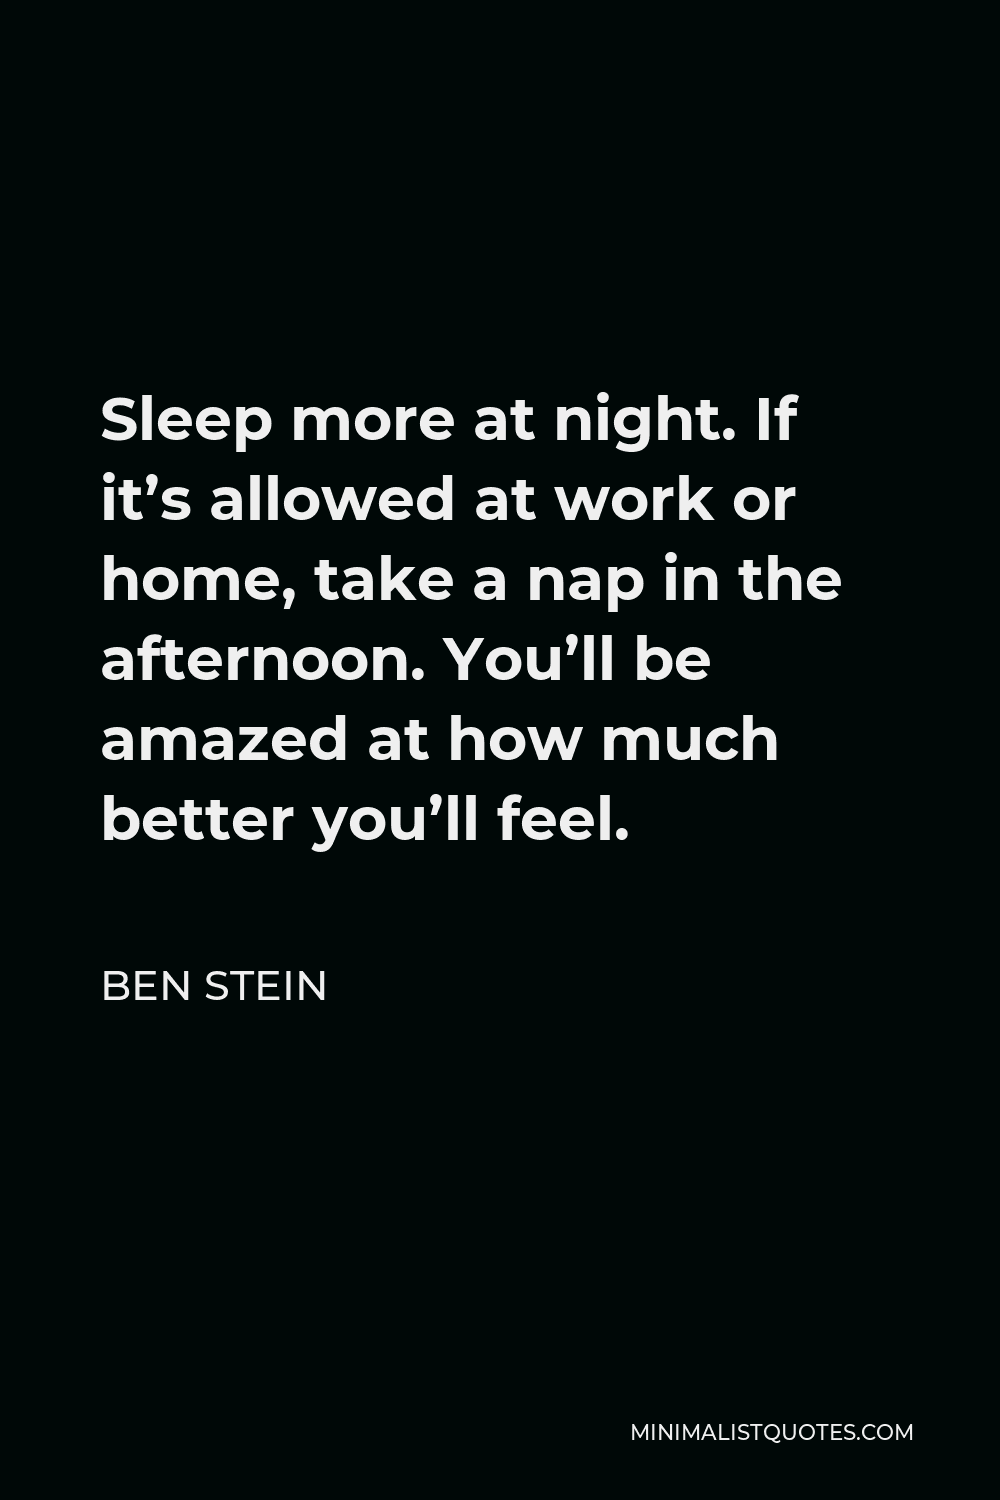 Ben Stein Quote - Sleep more at night. If it’s allowed at work or home, take a nap in the afternoon. You’ll be amazed at how much better you’ll feel.